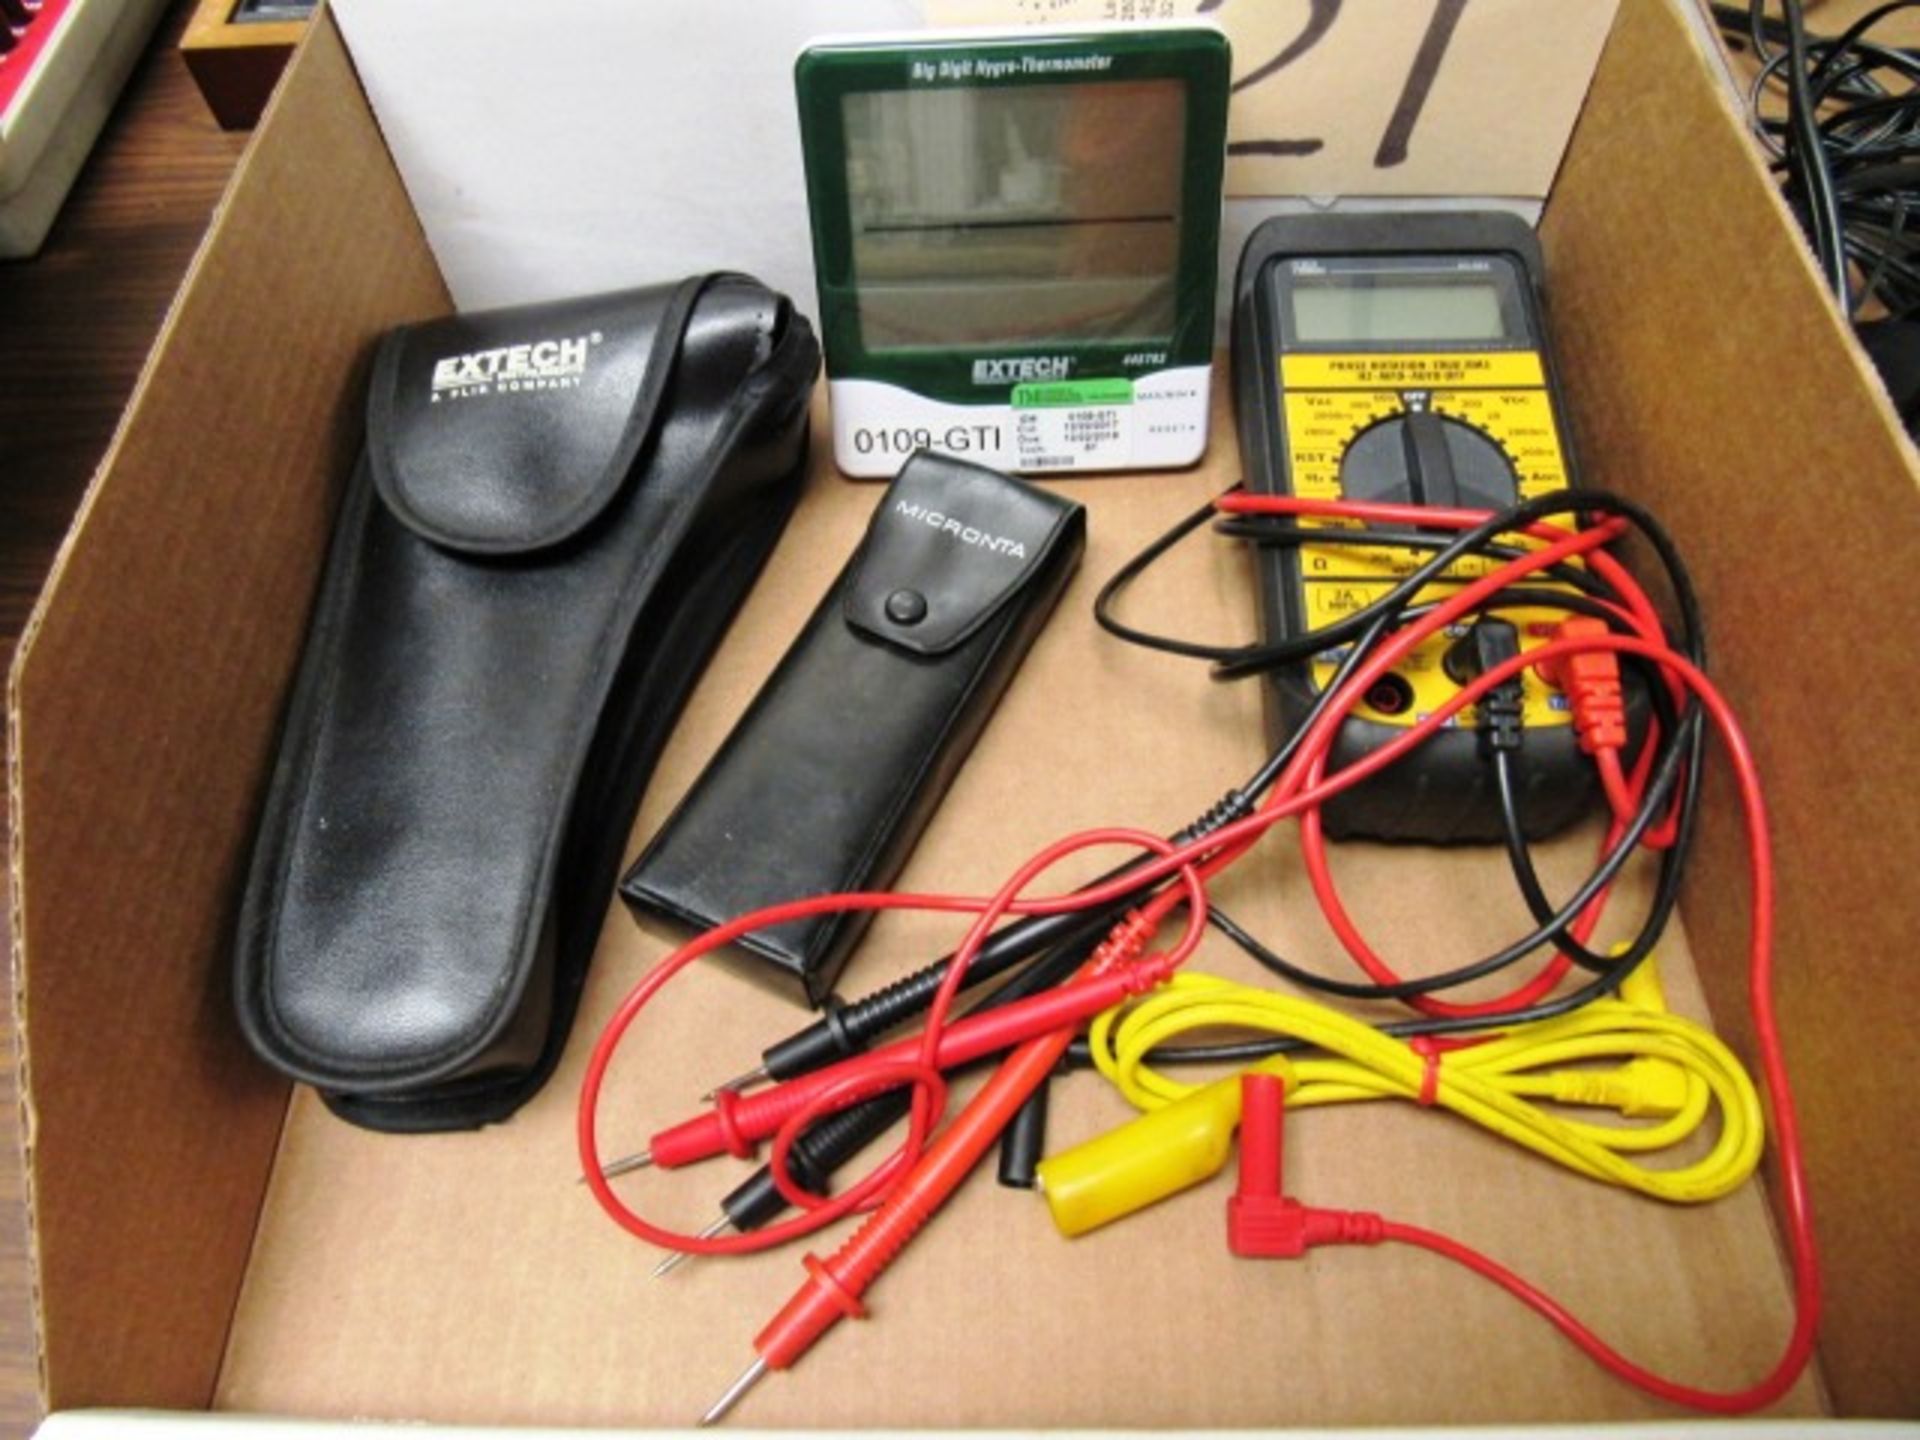 Ideal Phase Tester, Micronta Microscope, (2) Extech Thermometers